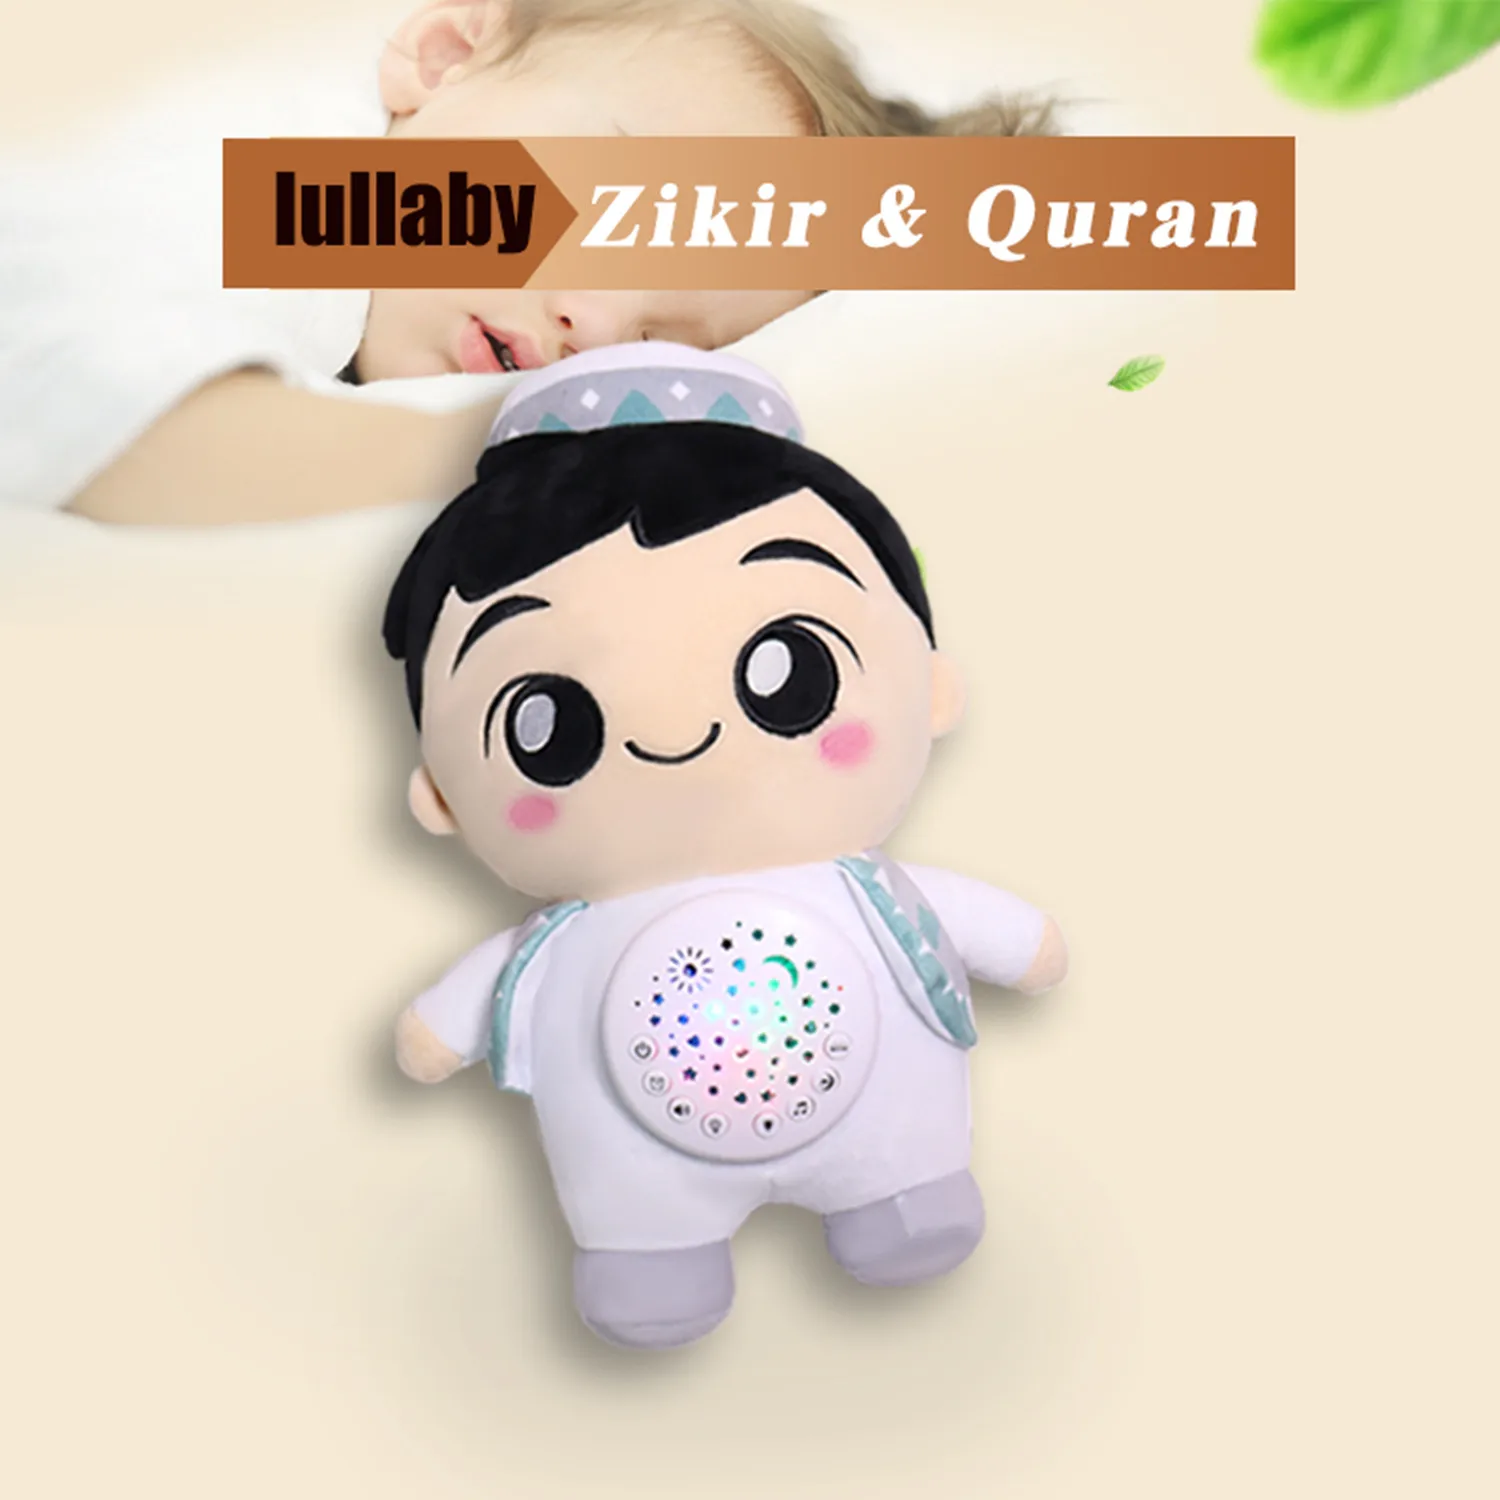 android mp3 player Islamic Baby Gift for Kids Talking Doll Toys Sleep Art Items Home Decor Prayer Set Muslim Mat Products Decoration Quran Praying samsung mp3 player